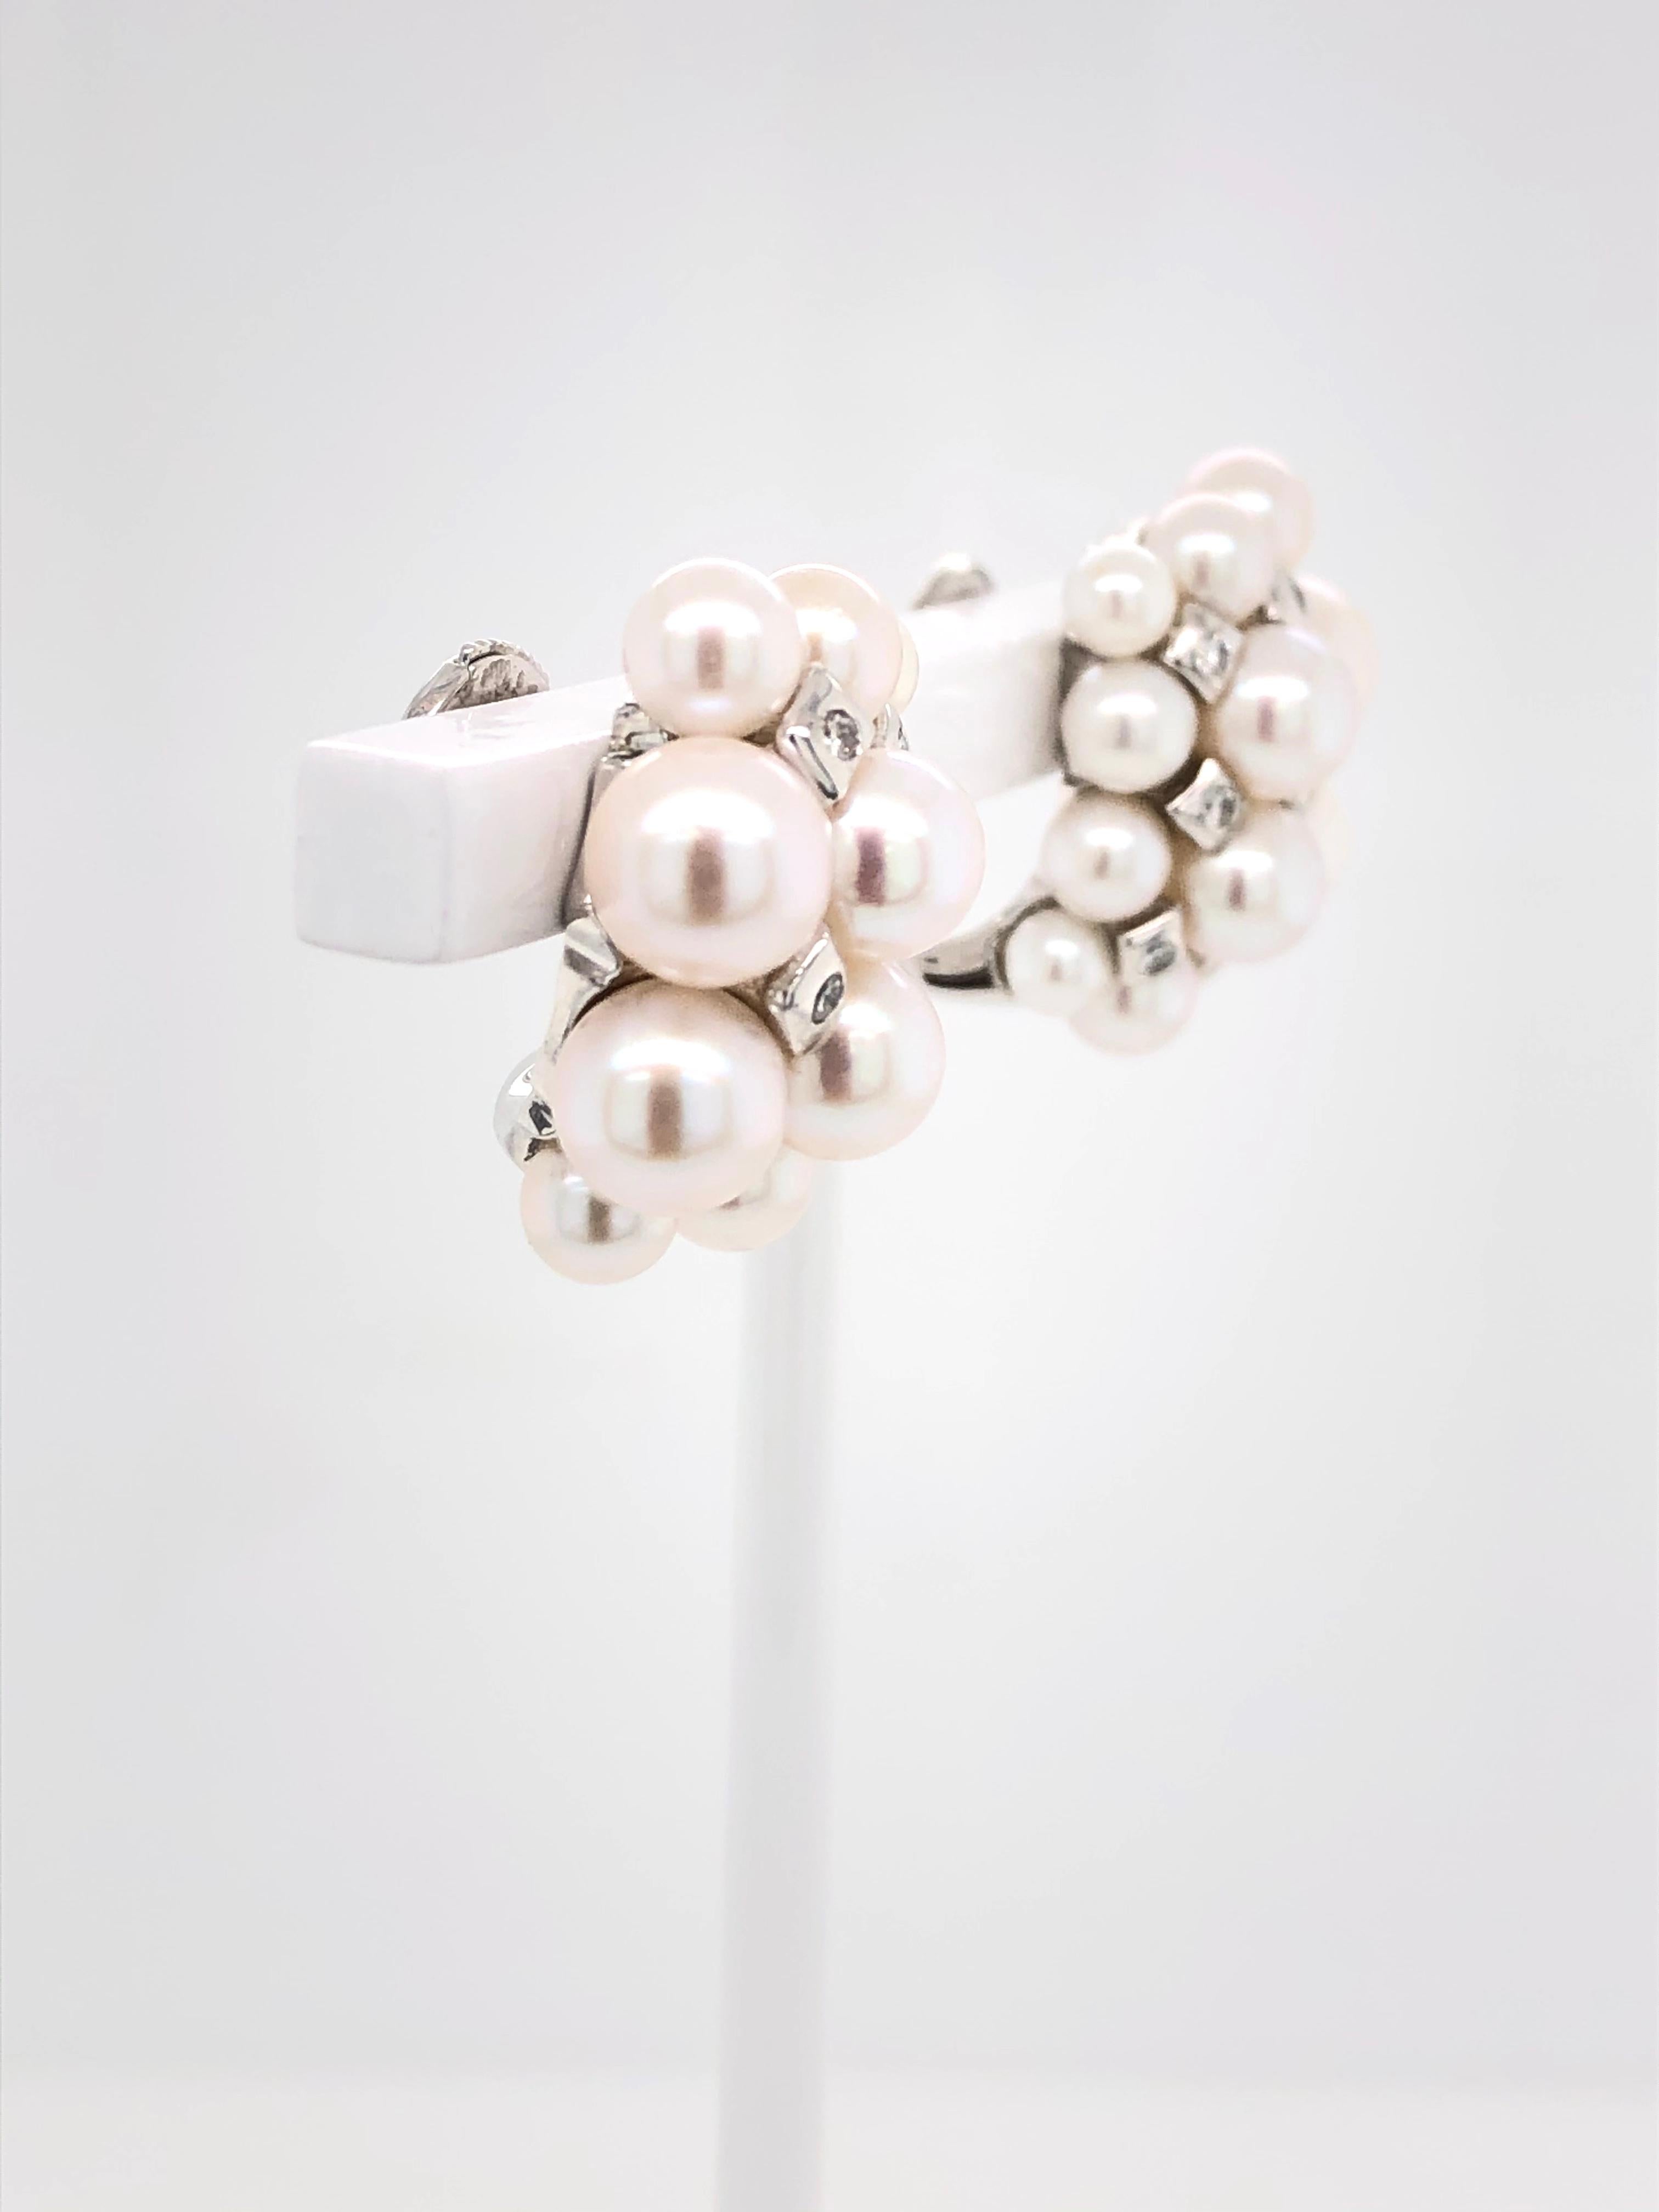 Contemporary Akoya Pearls with White Diamonds on White Gold 18 Karat Earrings